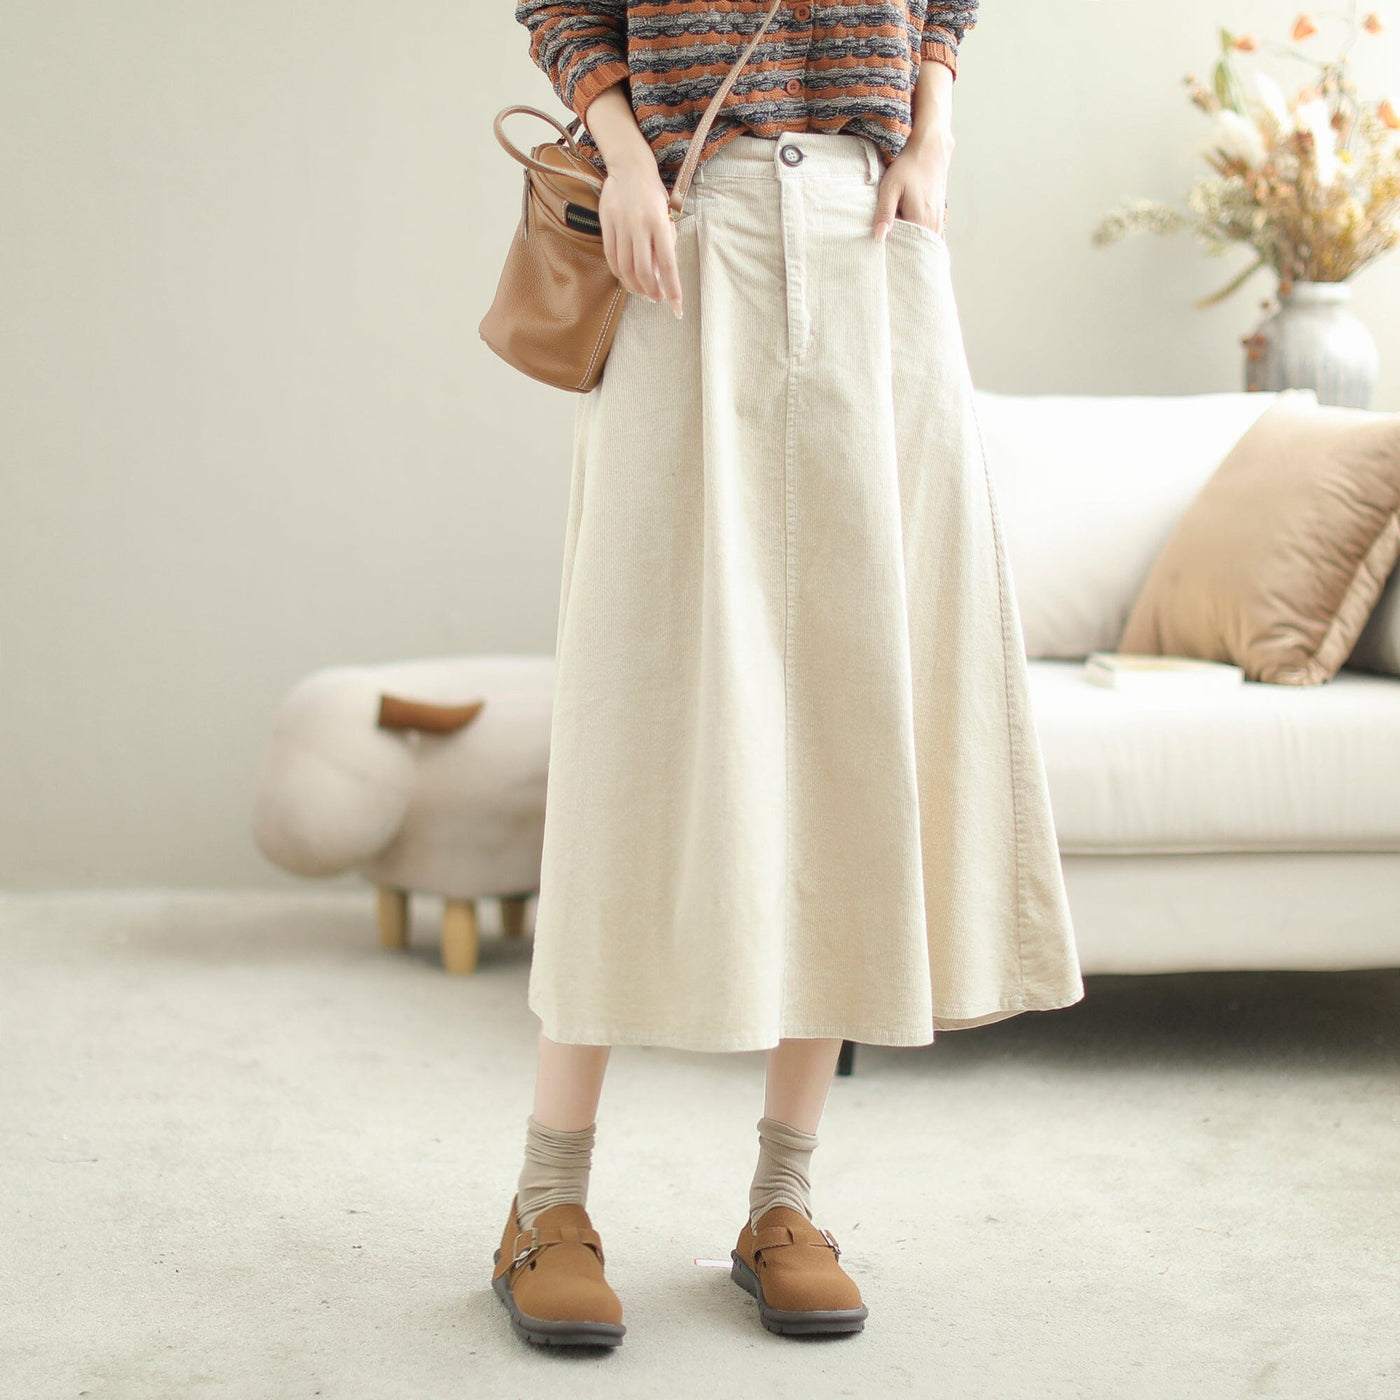 Women Autumn Solid Corduroy Casual A-Line Skirt